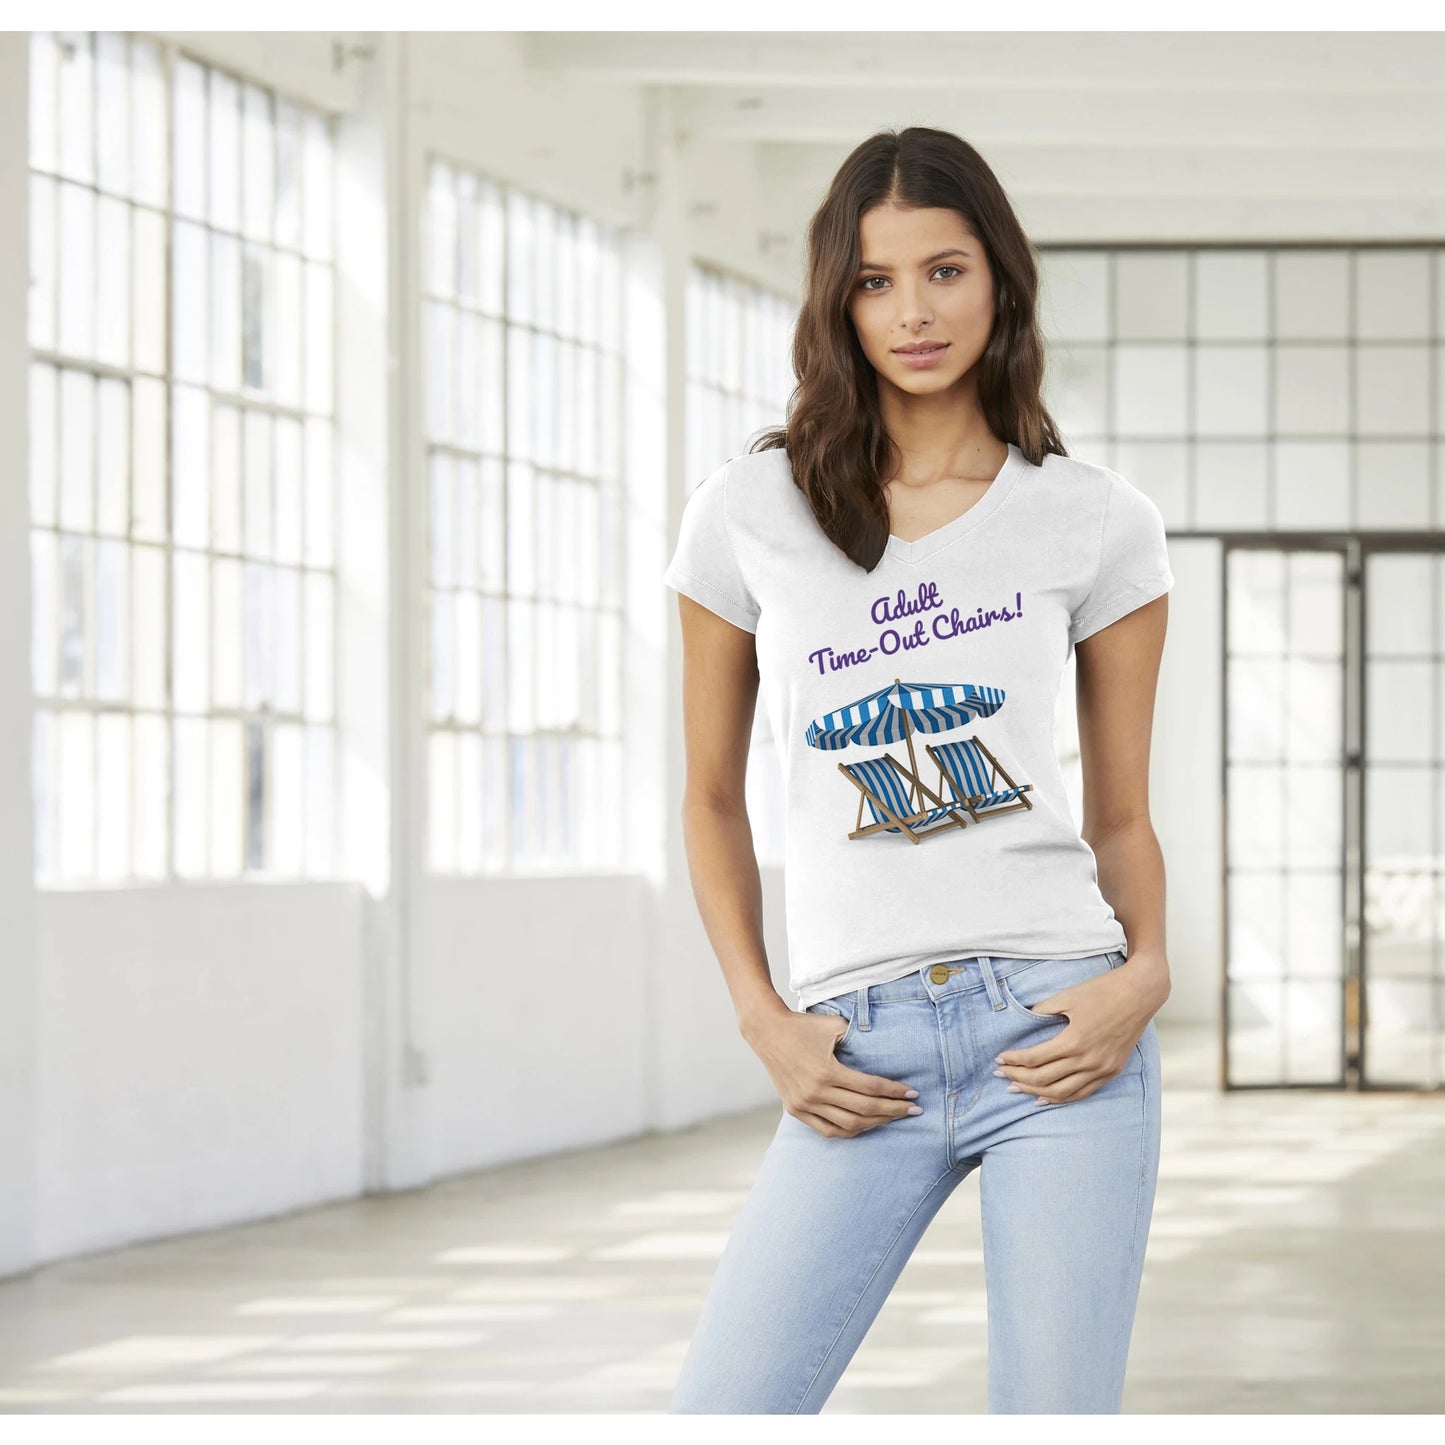 A premium women’s V-neck t-shirt from combed and ring-spun cotton original Adult Time-Out Chairs! on front worn by a dark-haired female model standing with both thumbs in front pockets.